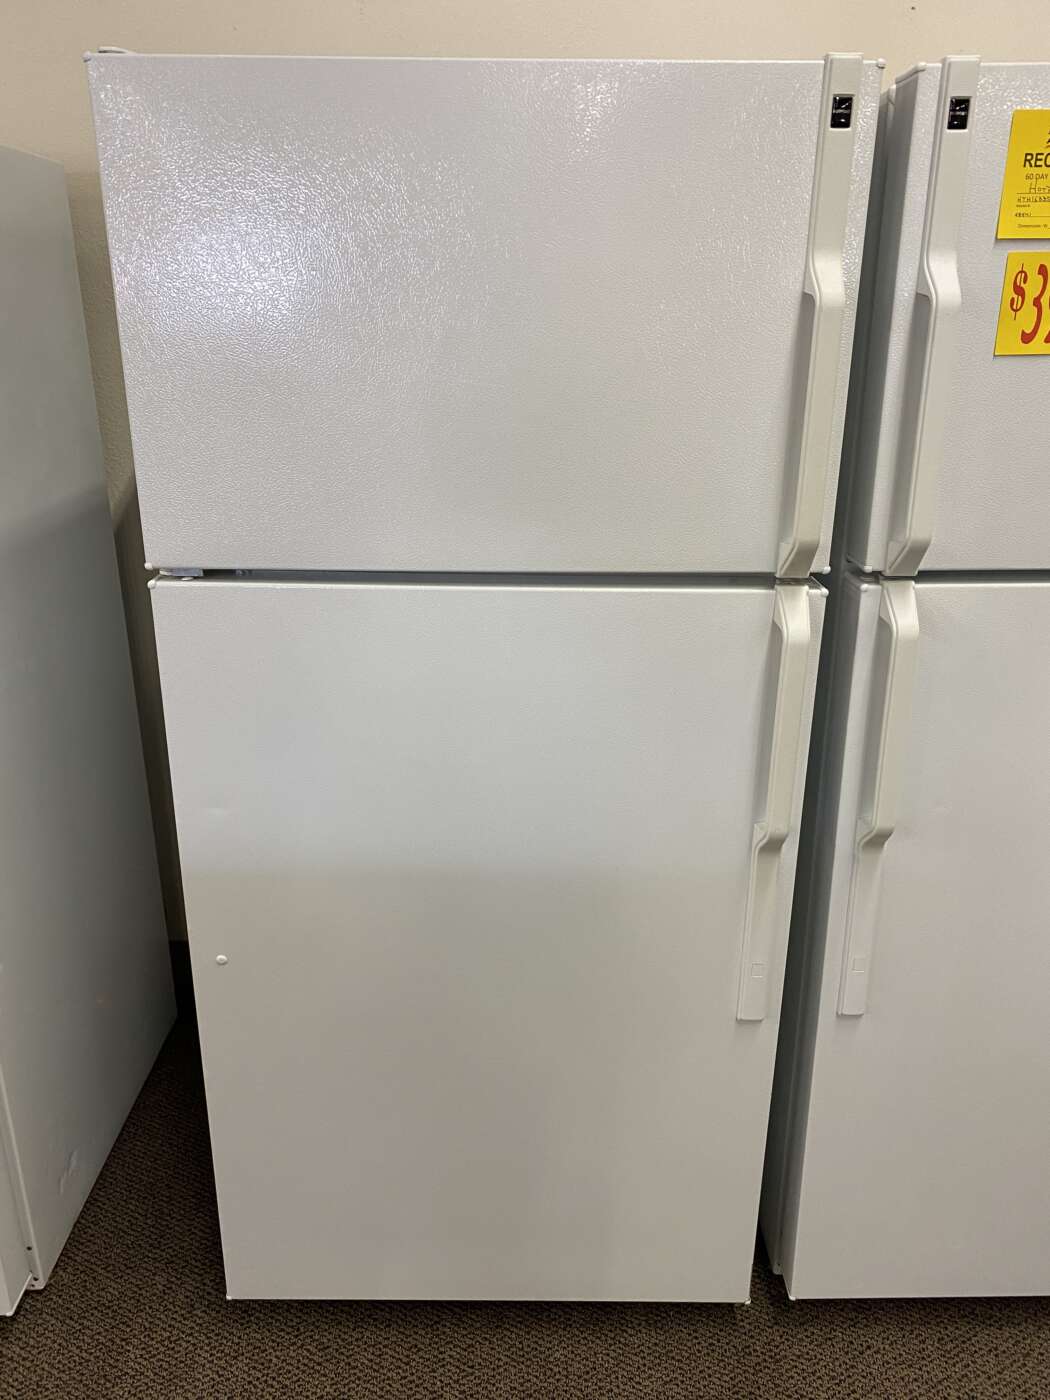 Reconditioned HOTPOINT 16 Cu. Ft. Top-Freezer Refrigerator – White